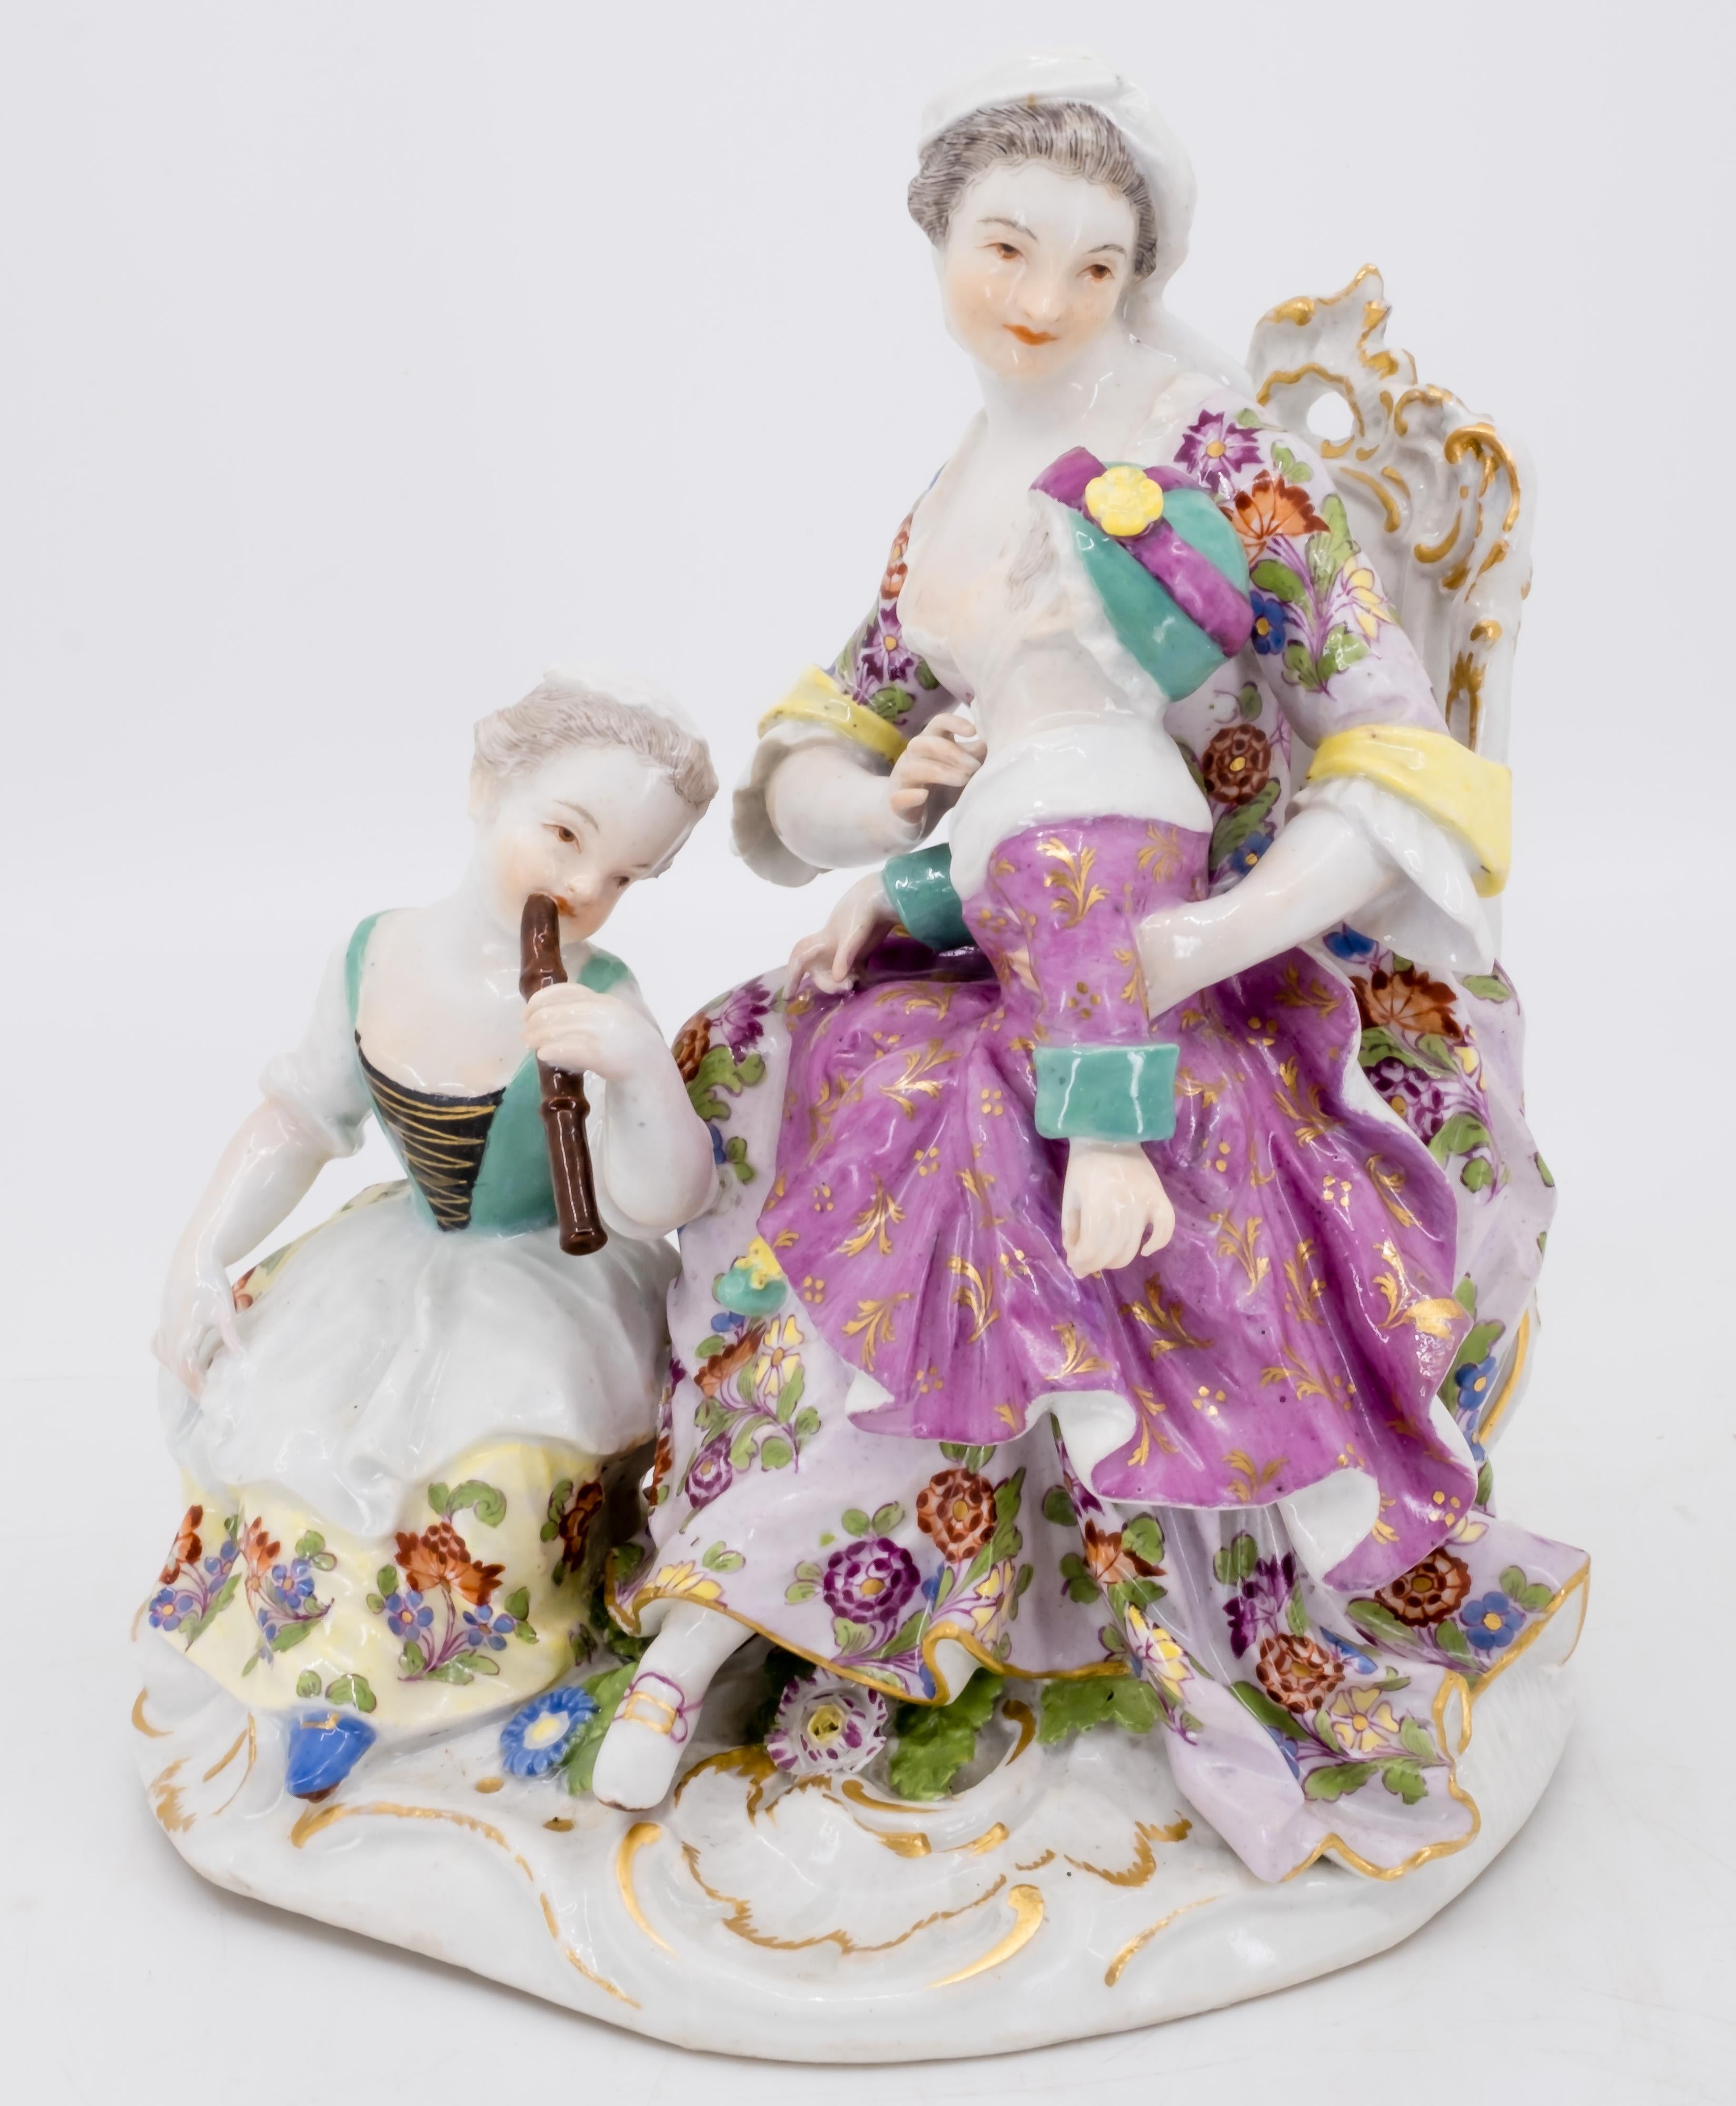 A figurine of a mother and two children, the girl playing the flute
German, Meissen, mid-18th century, marked for Meissen,
porcelain, Germany with double crossed swords in under-glaze blue

Shipping included 
Free and fast delivery door to door